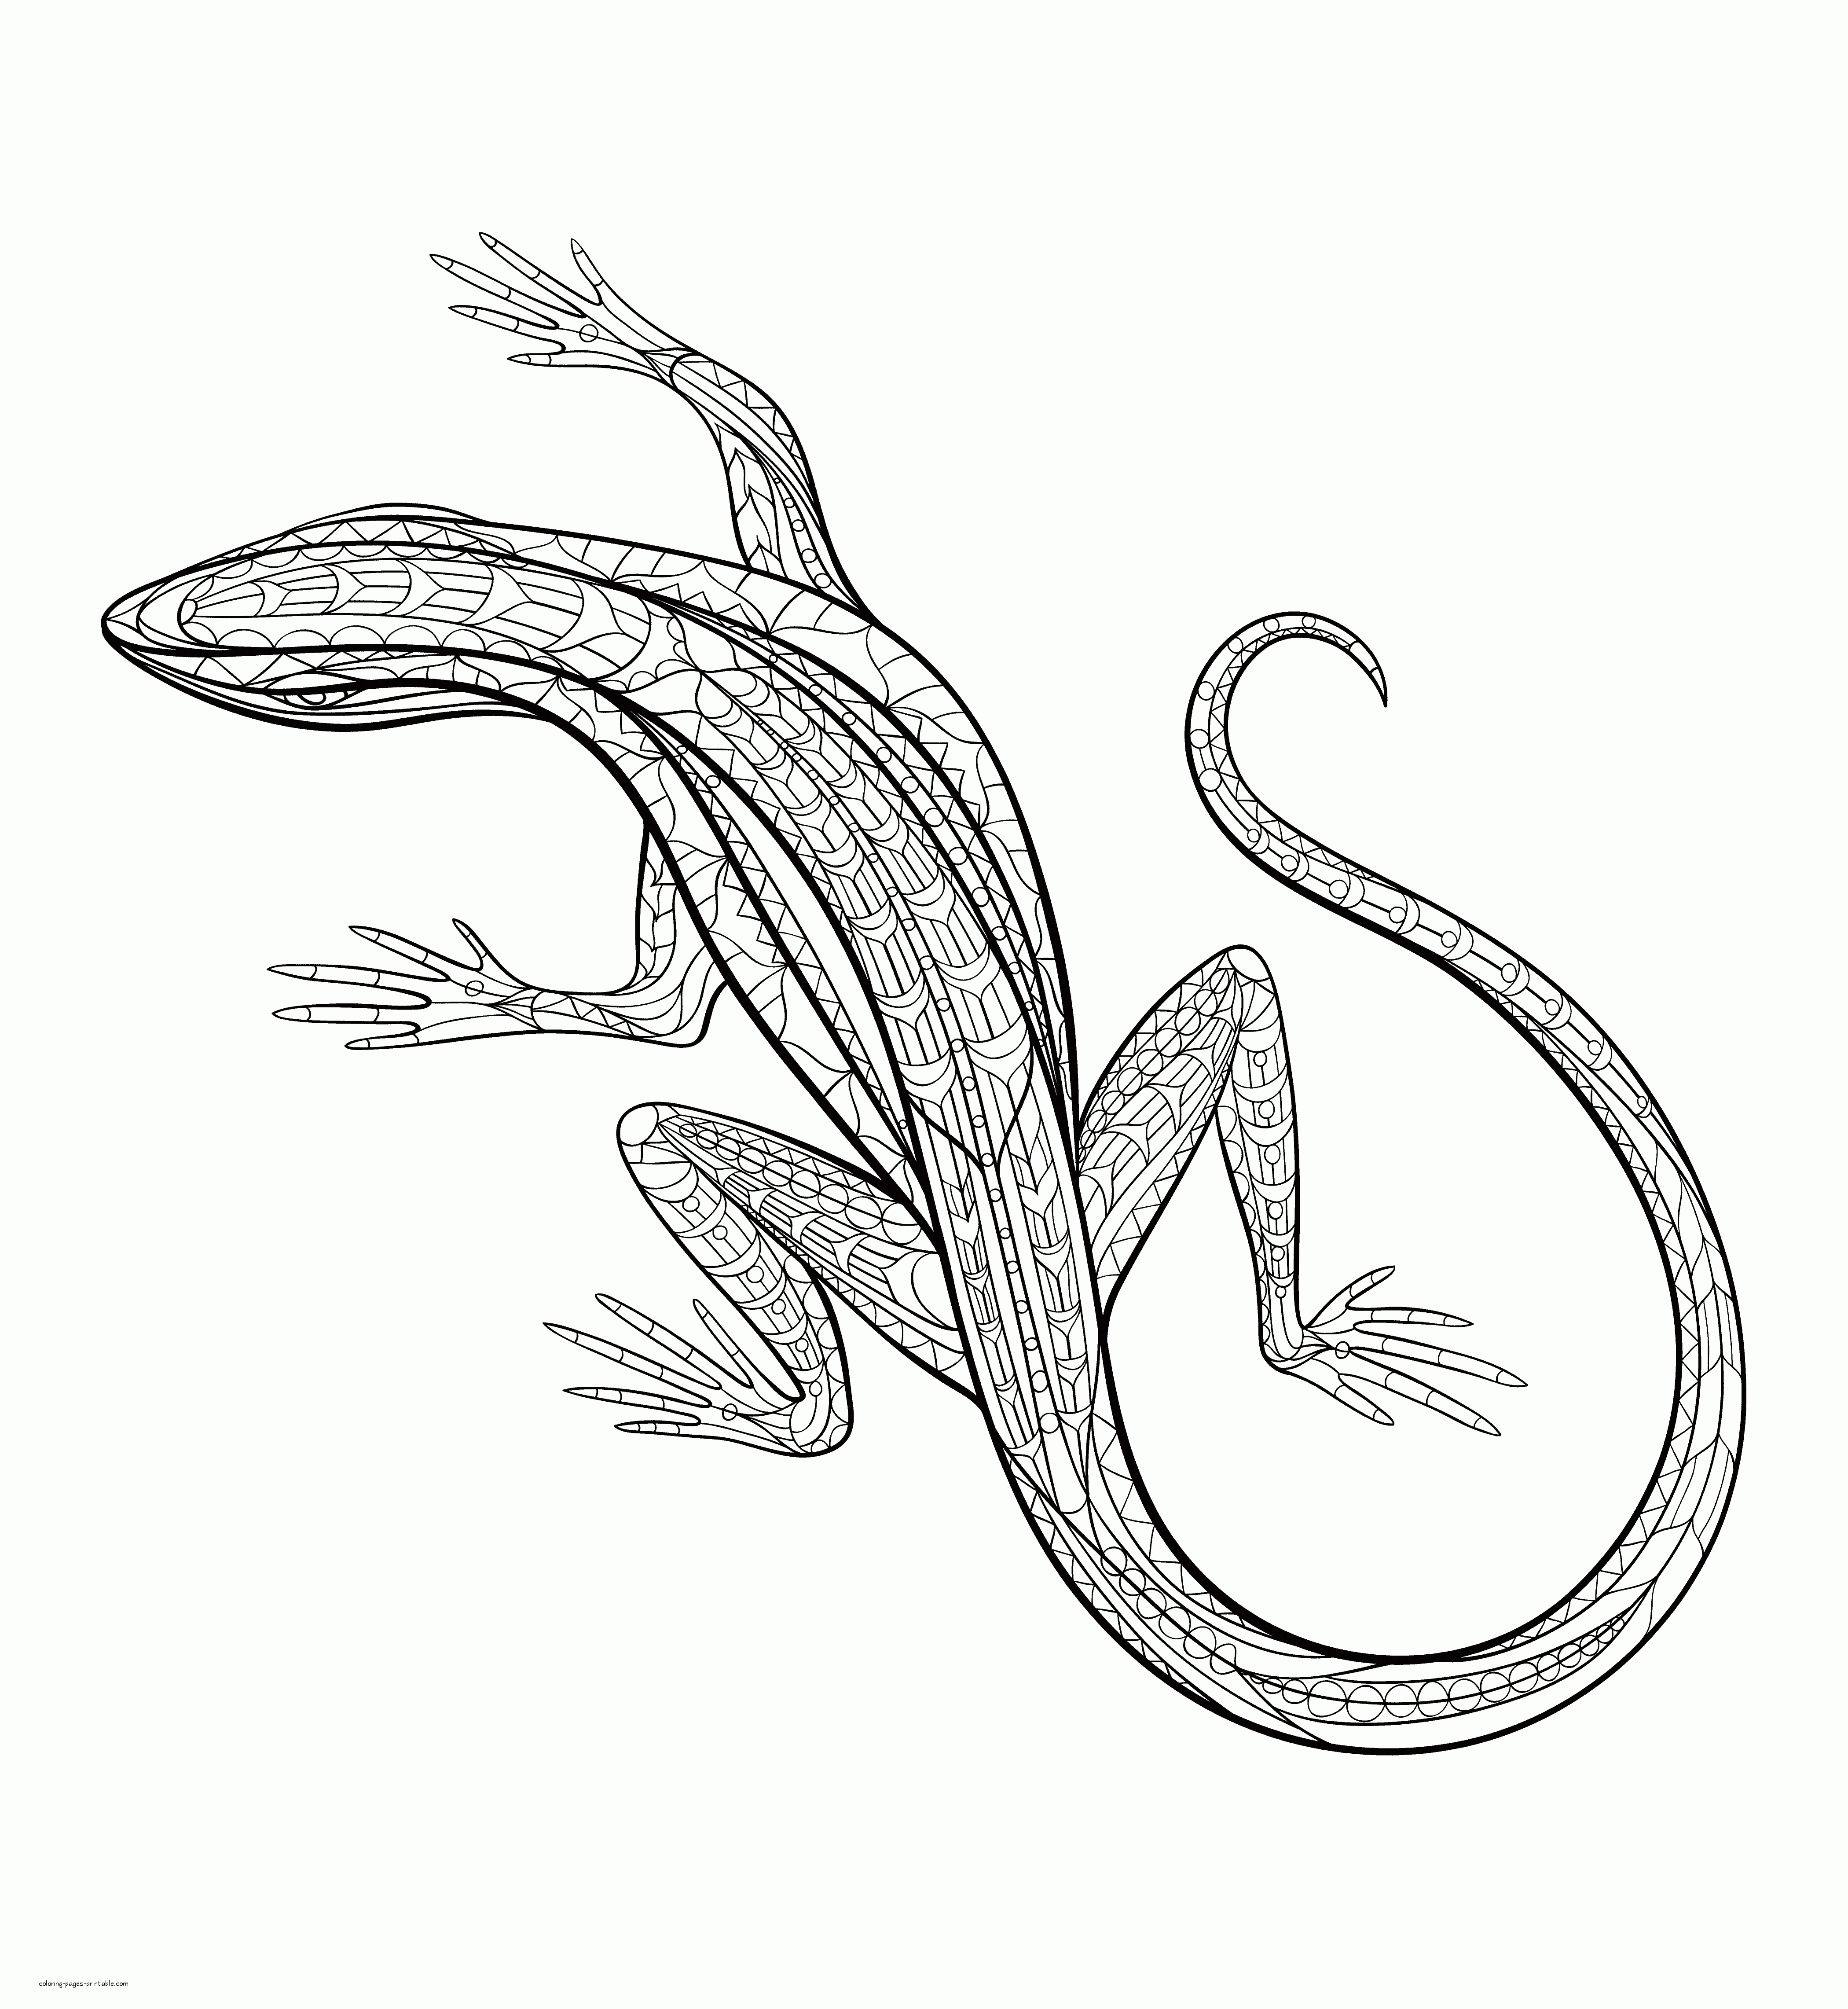 lizard-coloring-pages-for-adults-coloring-pages-printable-com